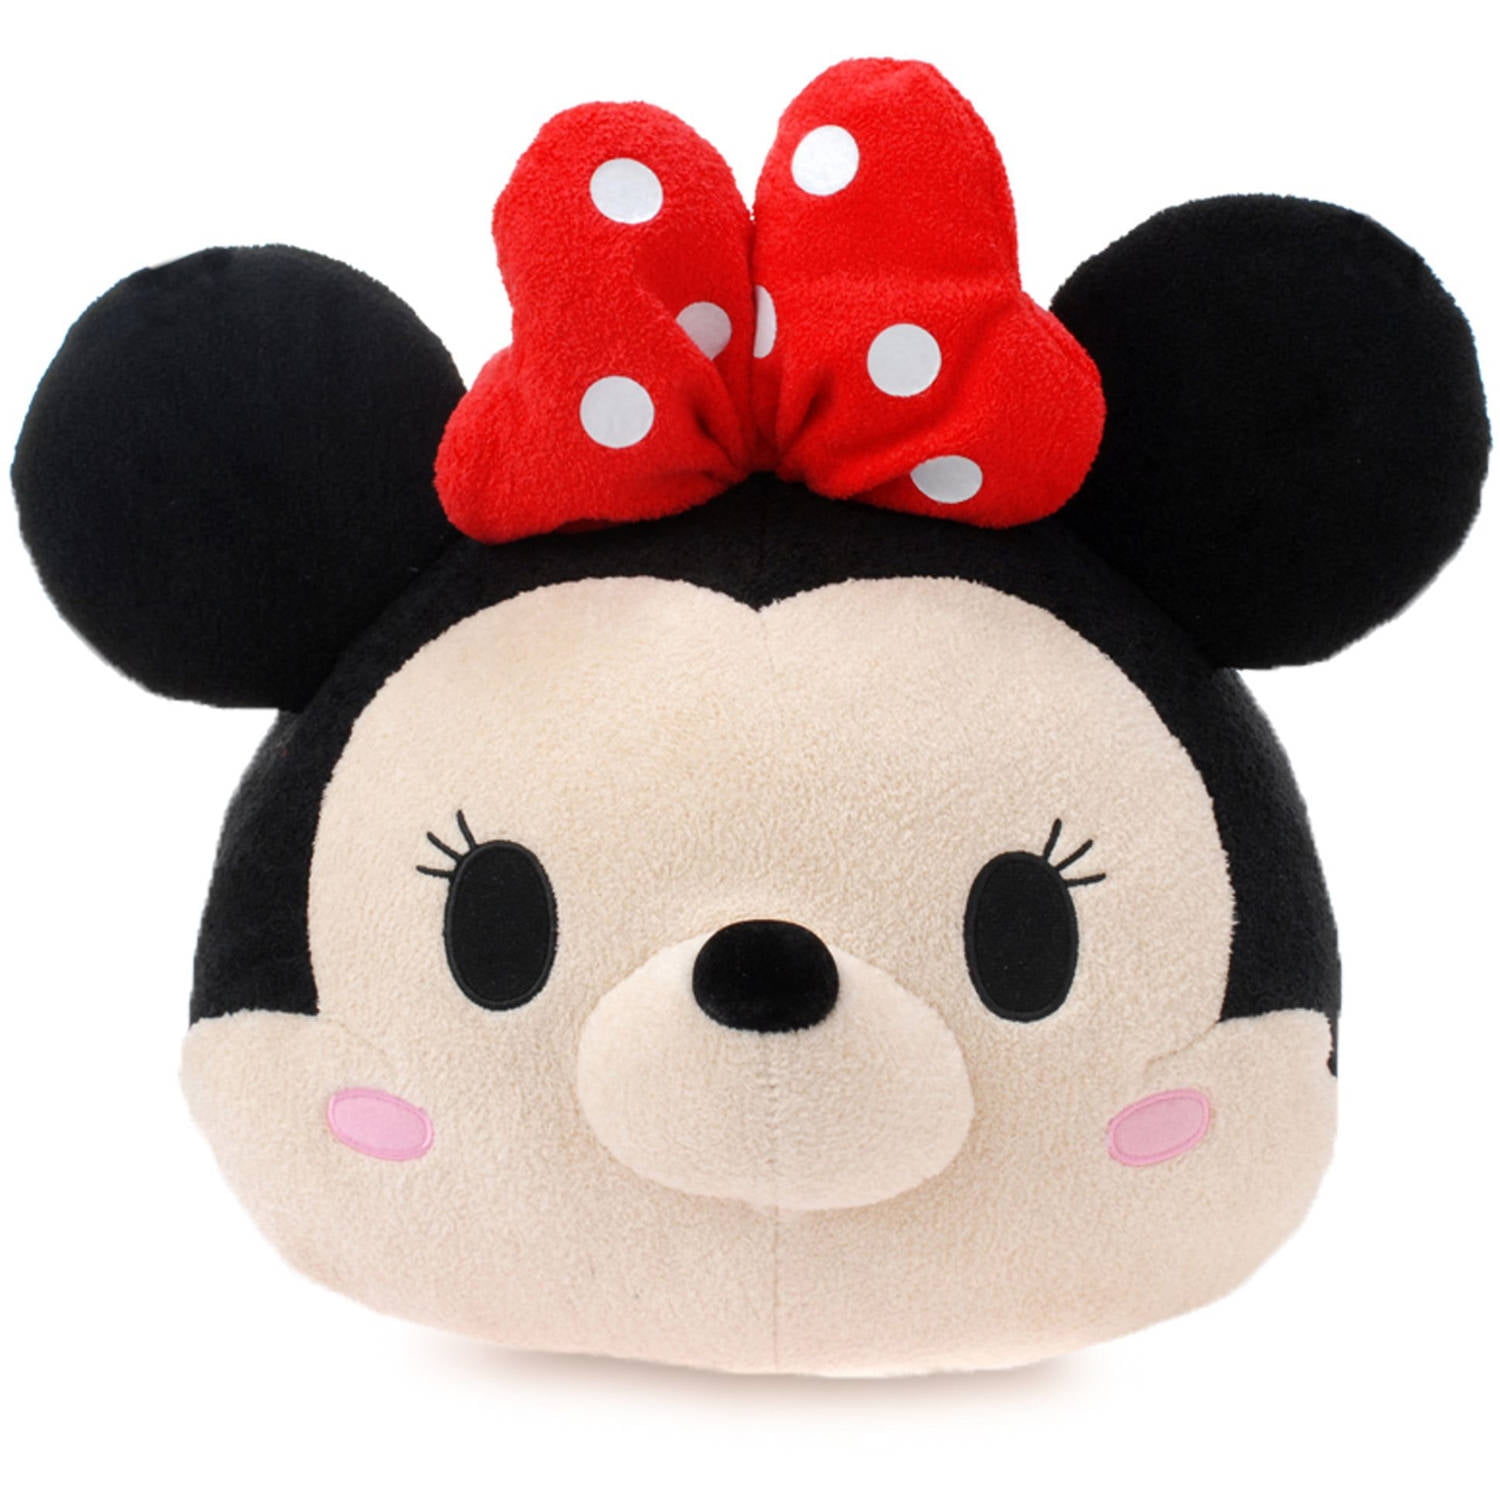 Disney Tsum Tsum Medium - Marie You talk about offensive and disgusting. ts...